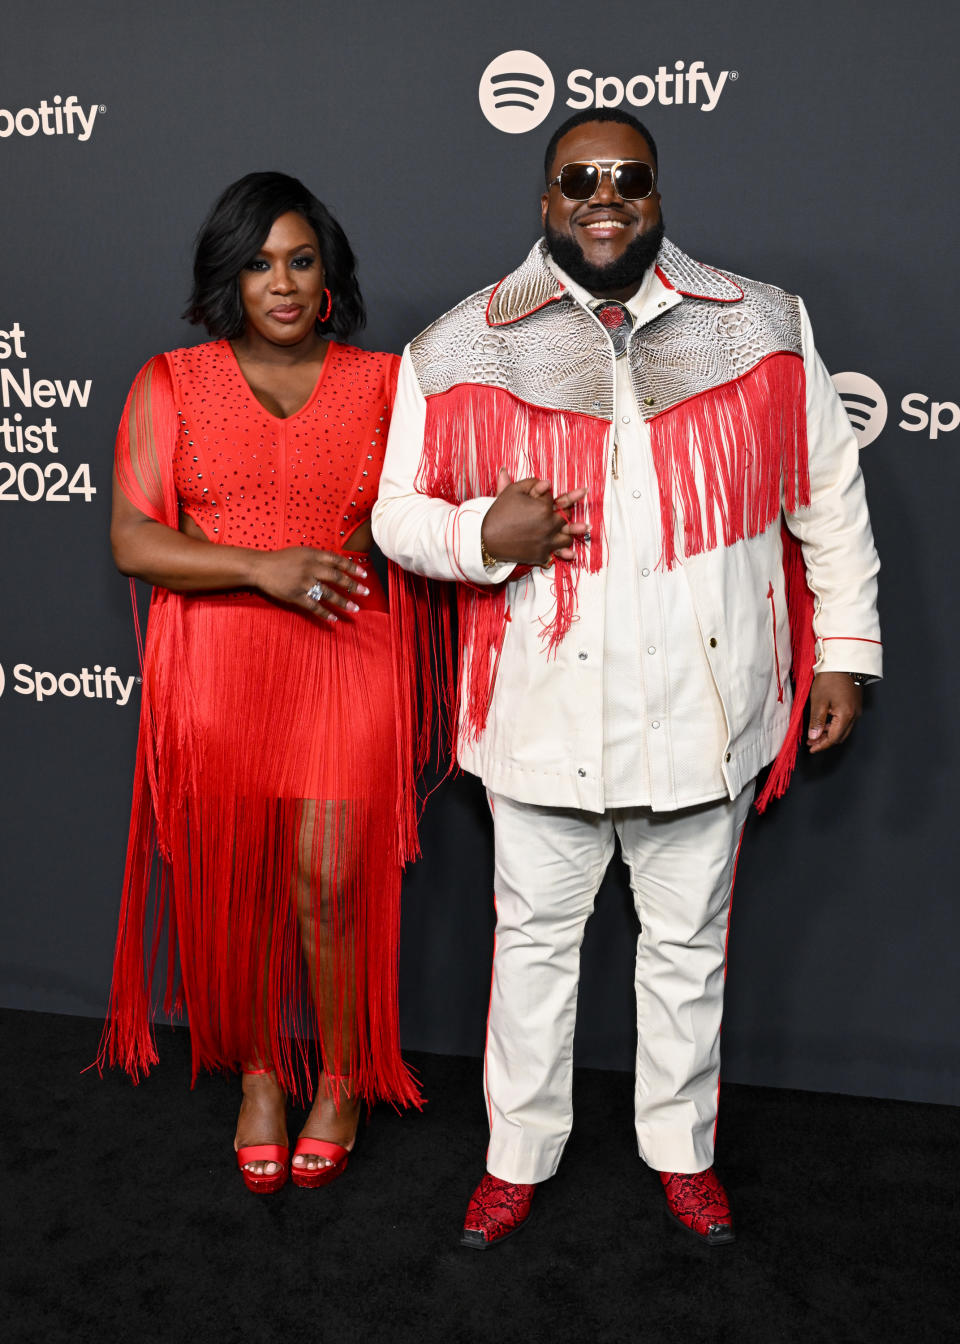 Tanya Trotter and Michael Trotter Jr. at the Spotify Best New Artist Party held at Paramount Studios on February 1, 2024 in Los Angeles, California.